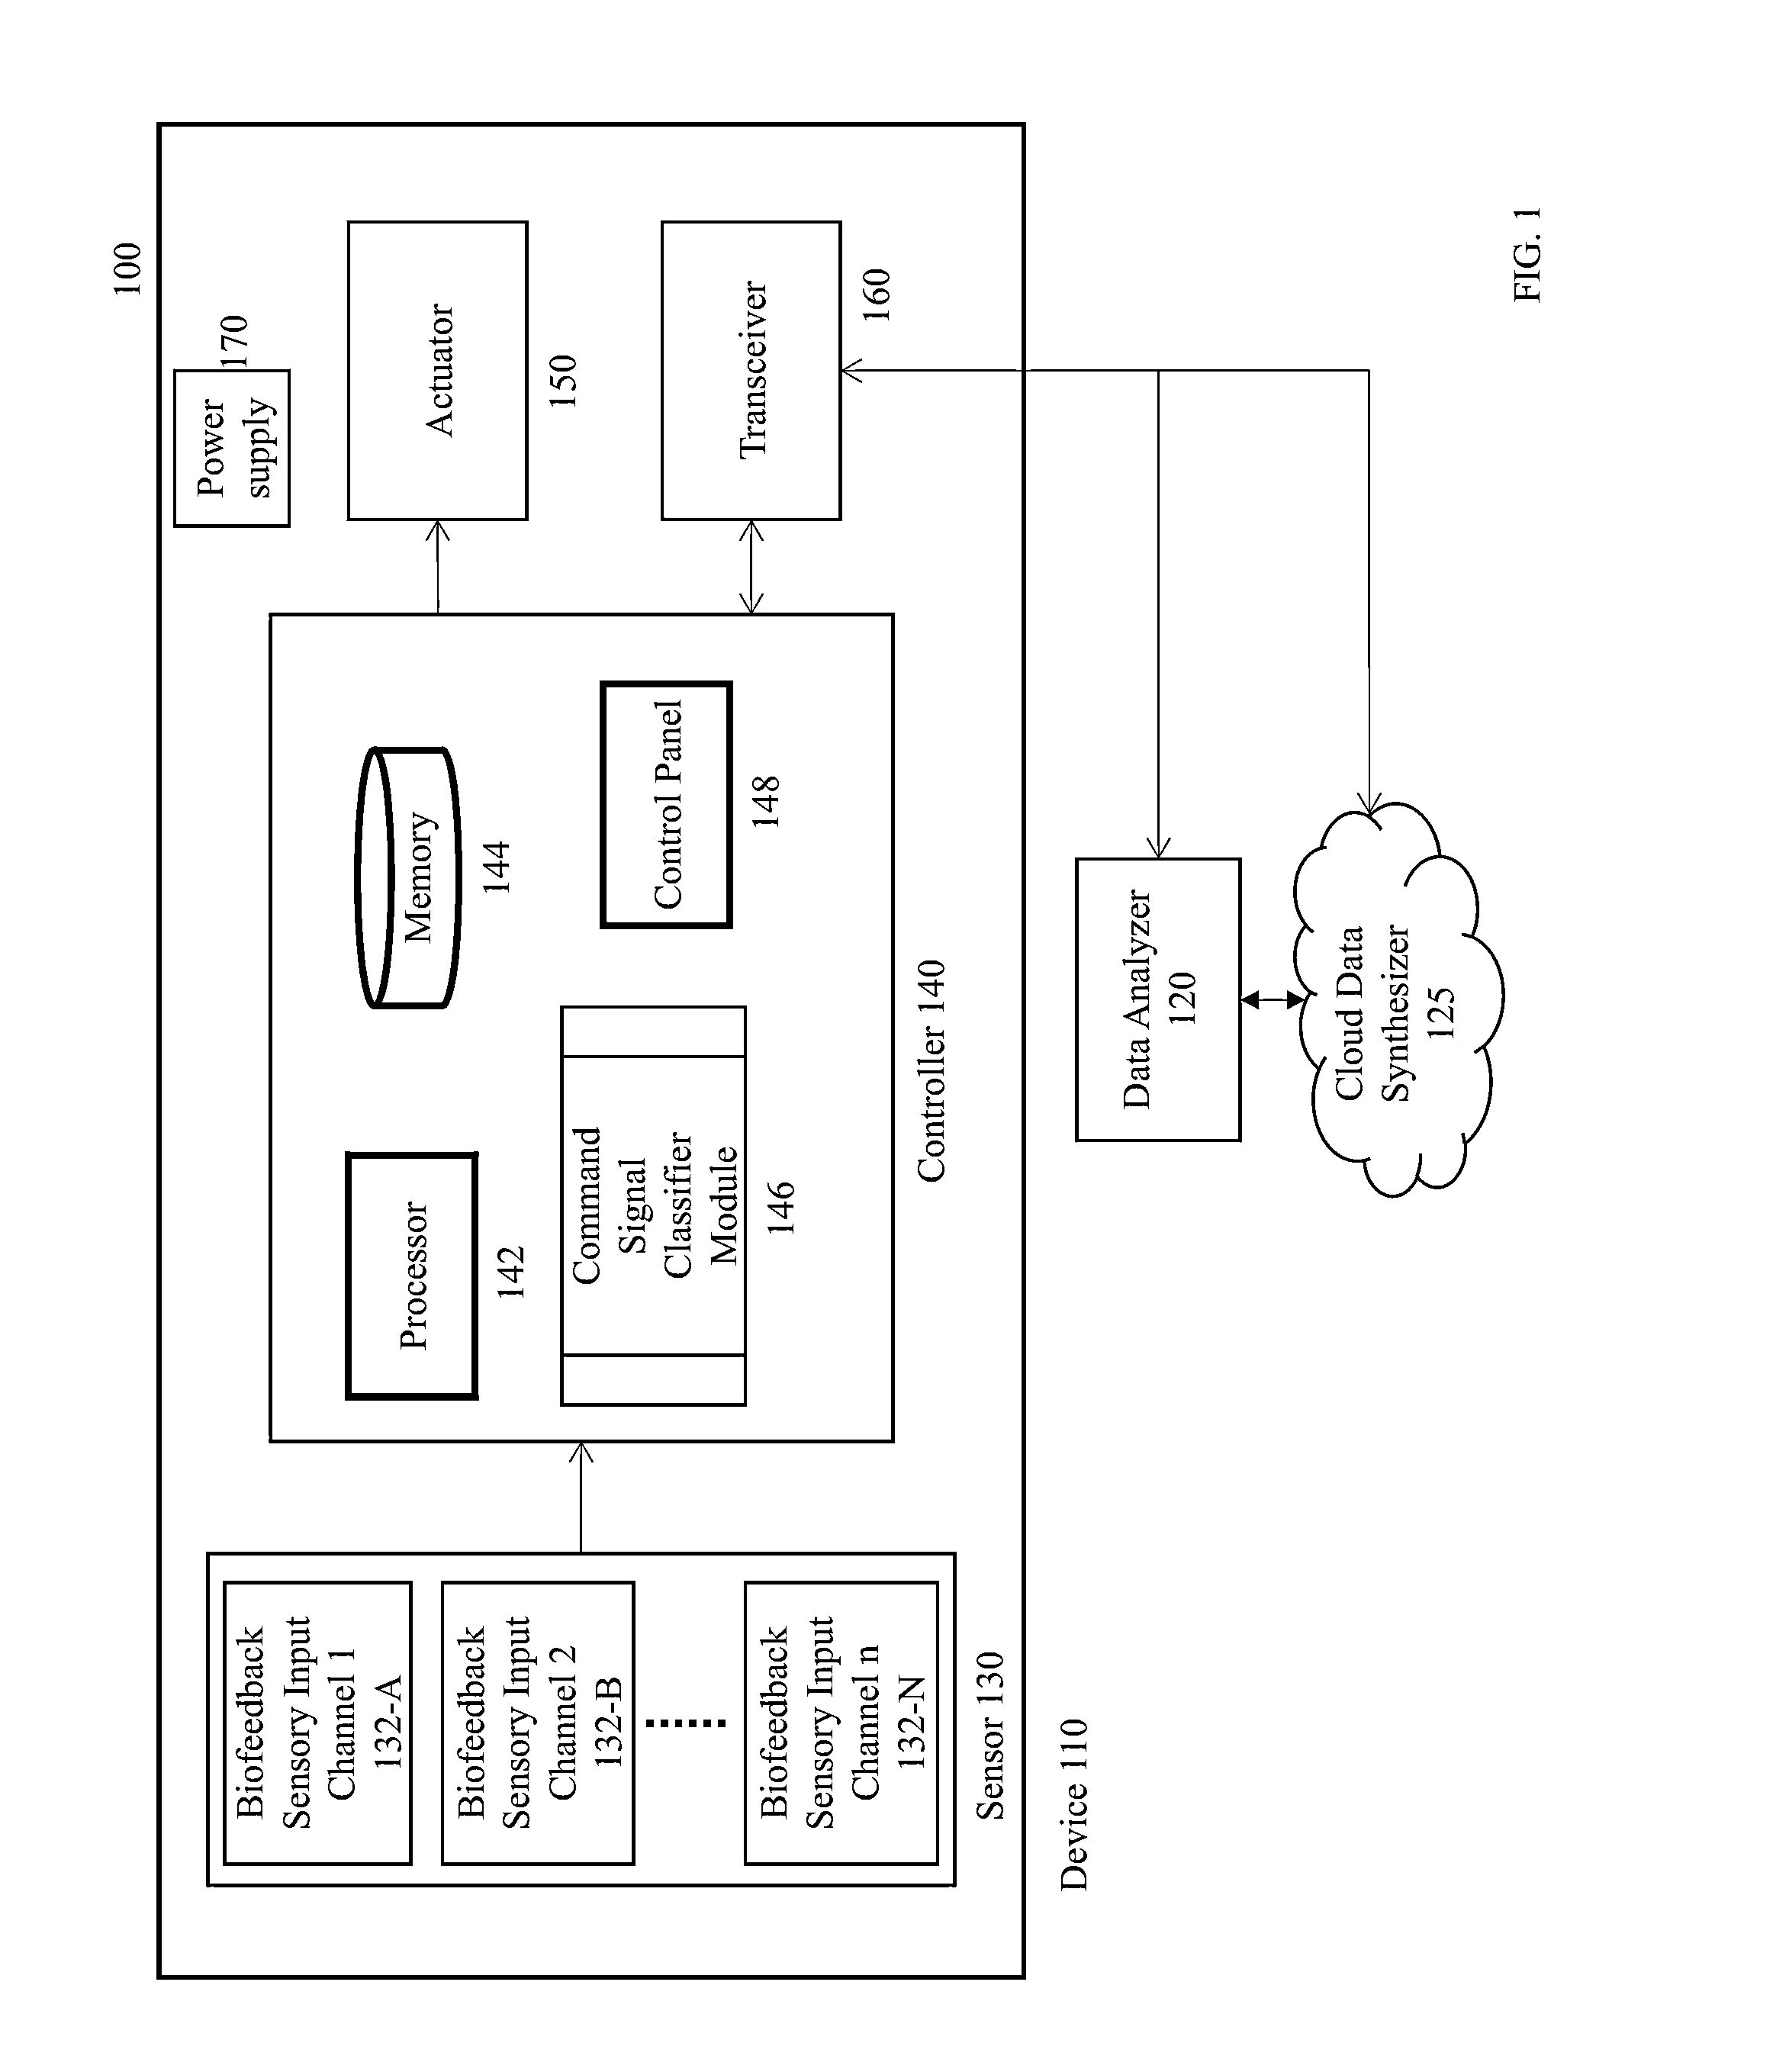 Systems and methods for providing adaptive biofeedback measurement and stimulation